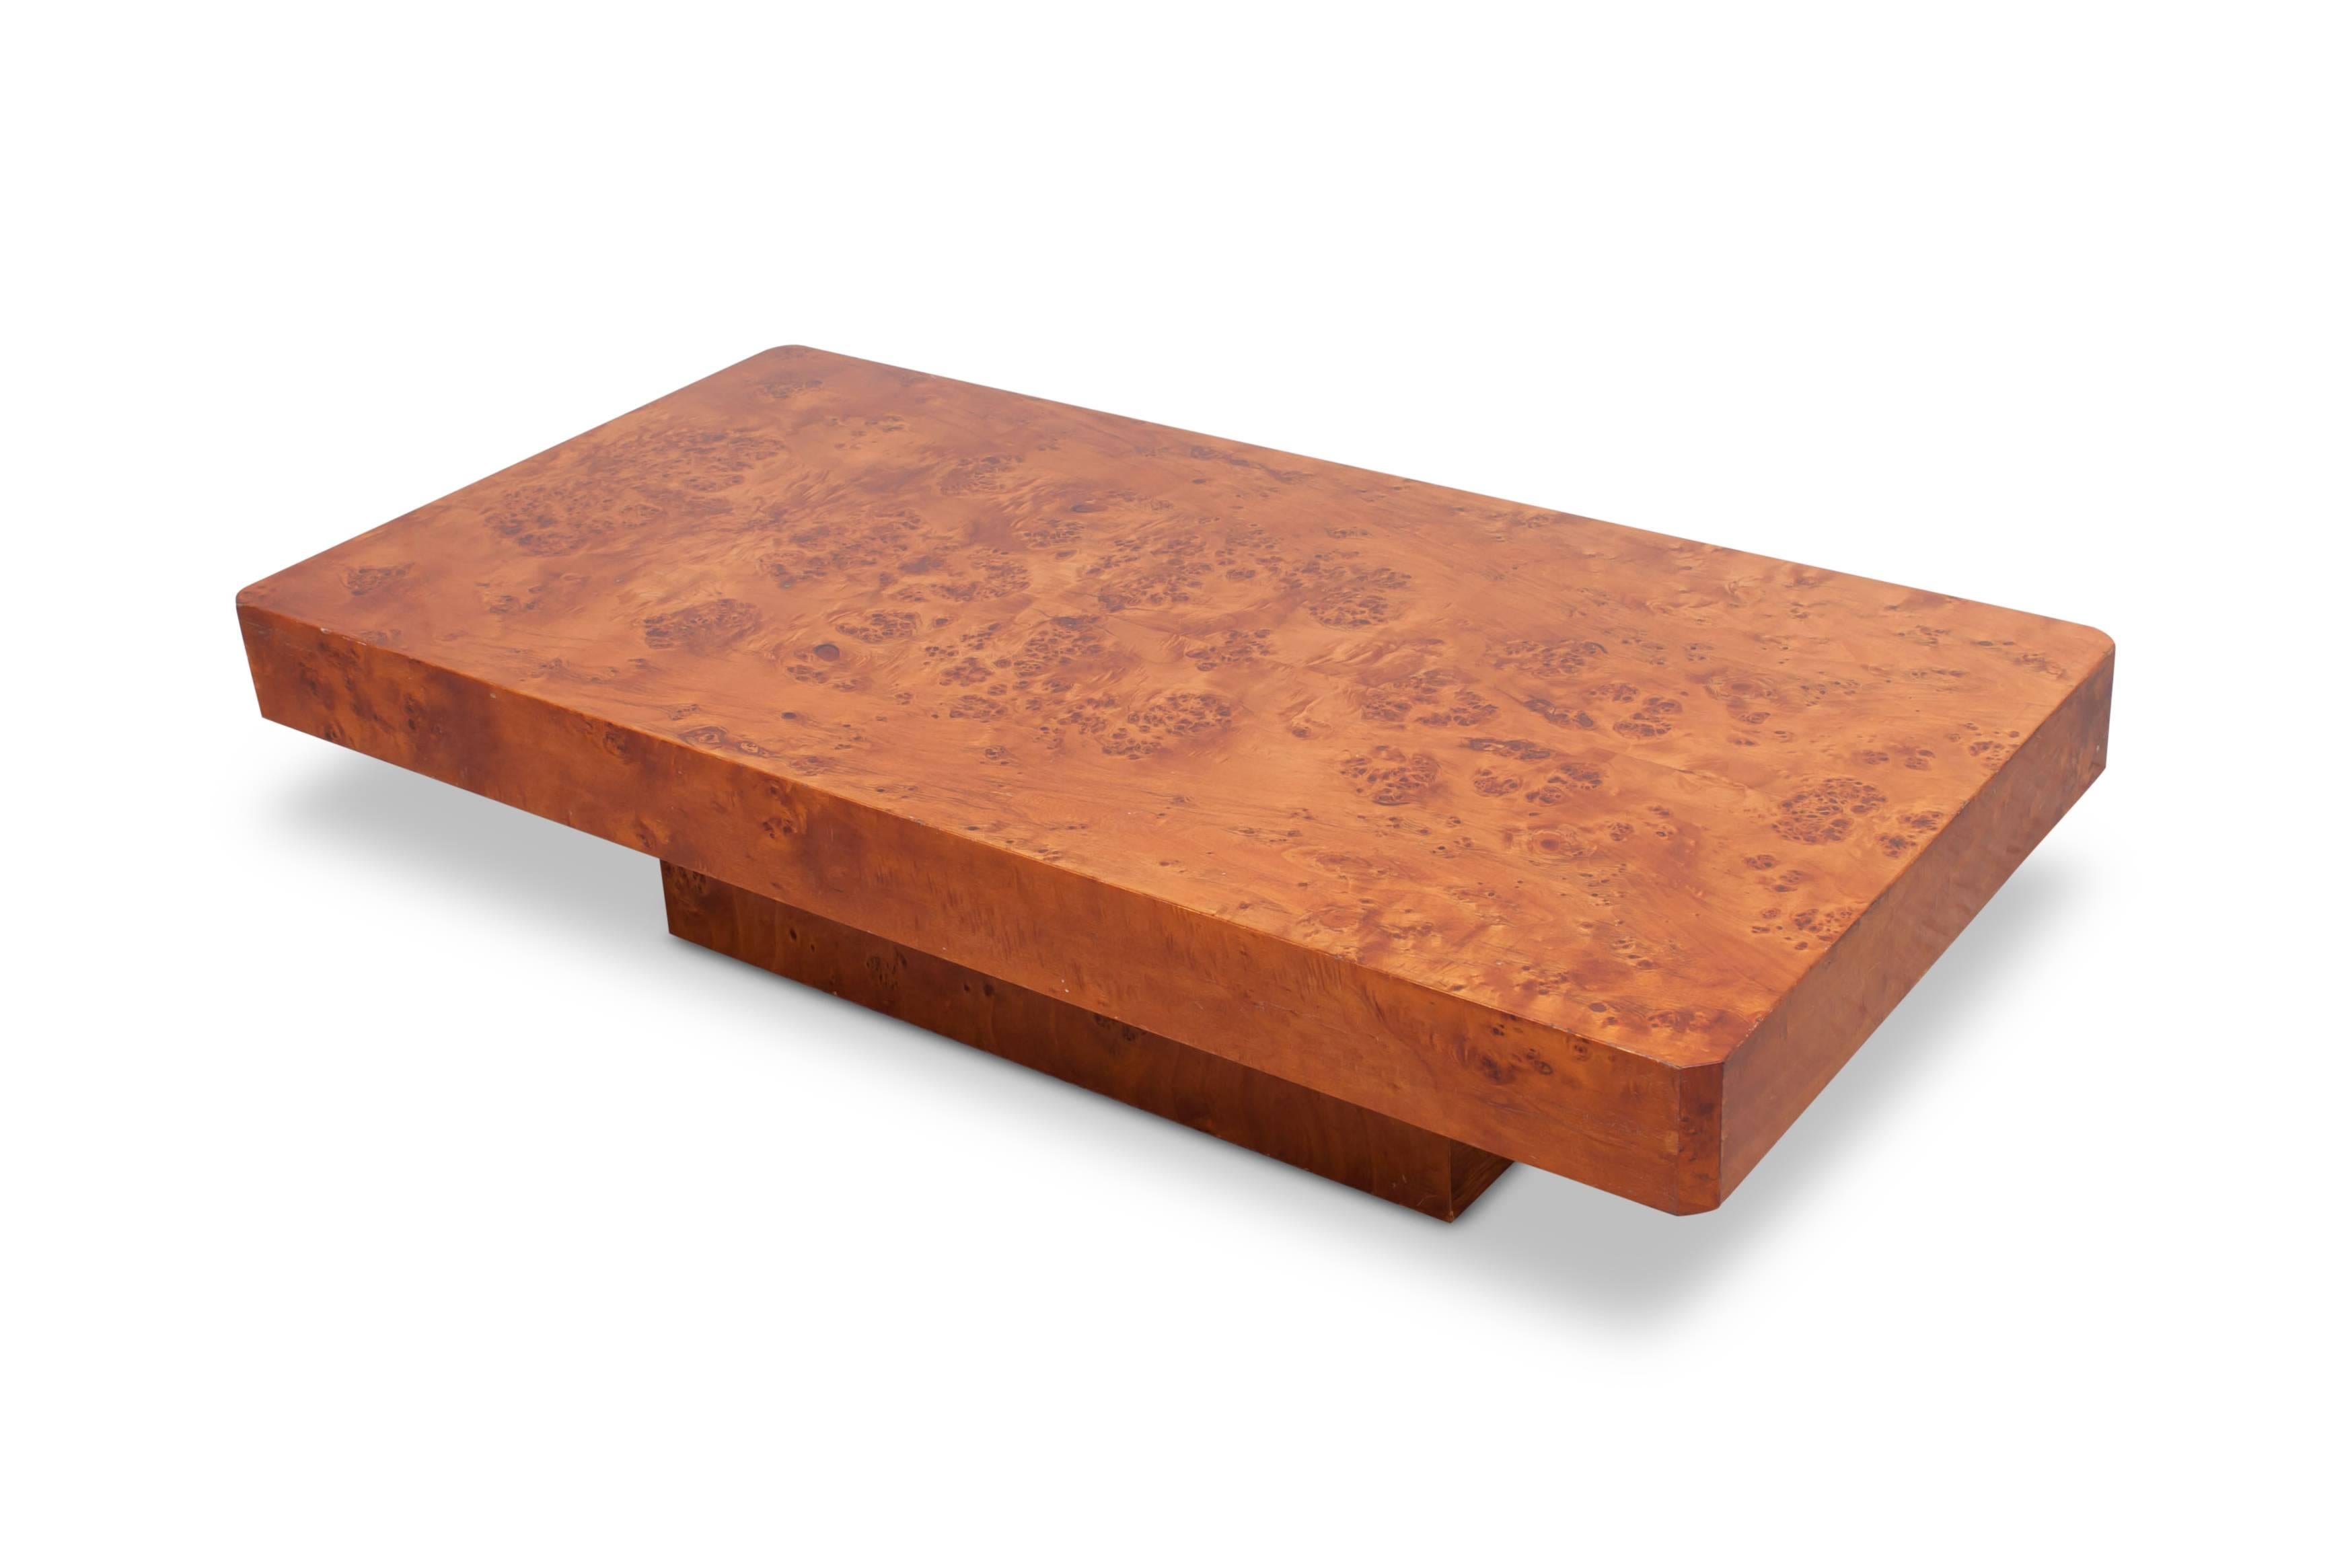 Rectangular burl wood coffee table in the style of Willy Rizzo, 1970s.
      